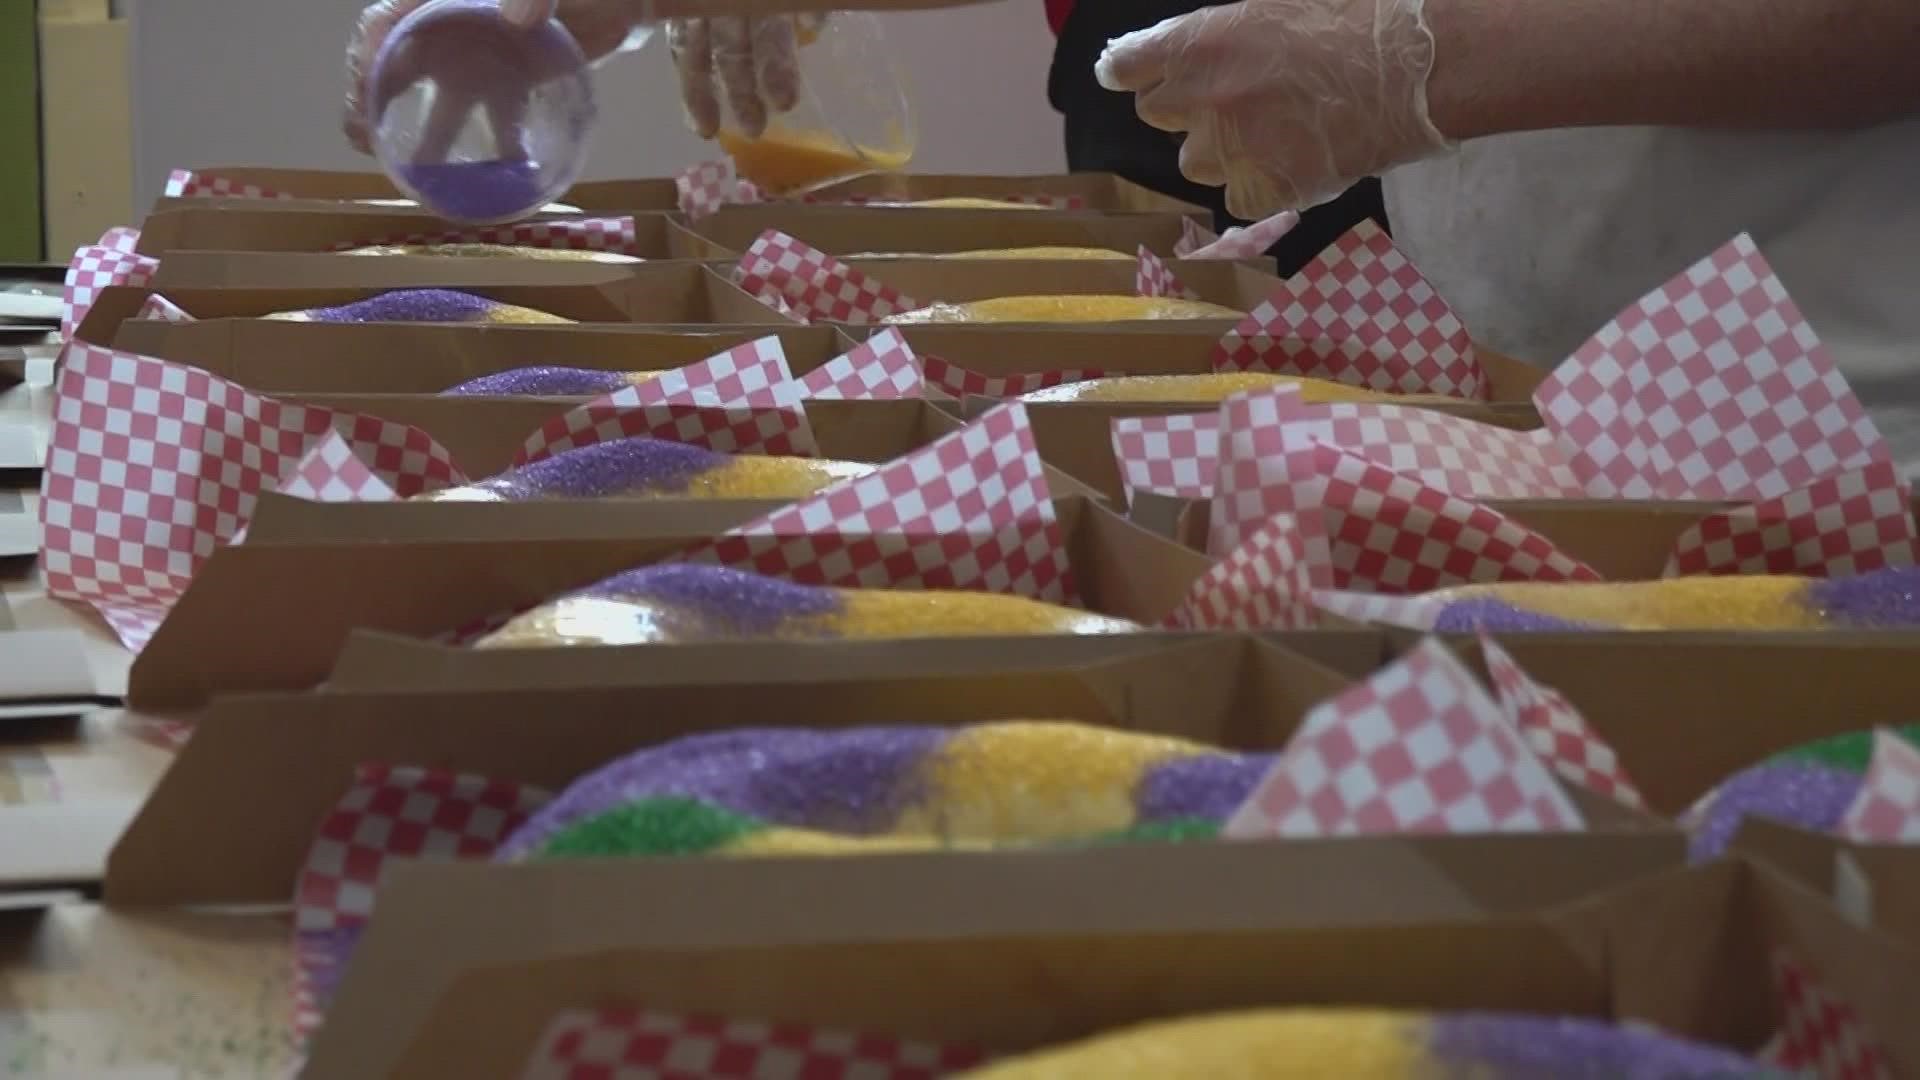 Bywater Bakery is expecting a huge crowd Friday for their annual king cake kickoff party from noon to 4 p.m.